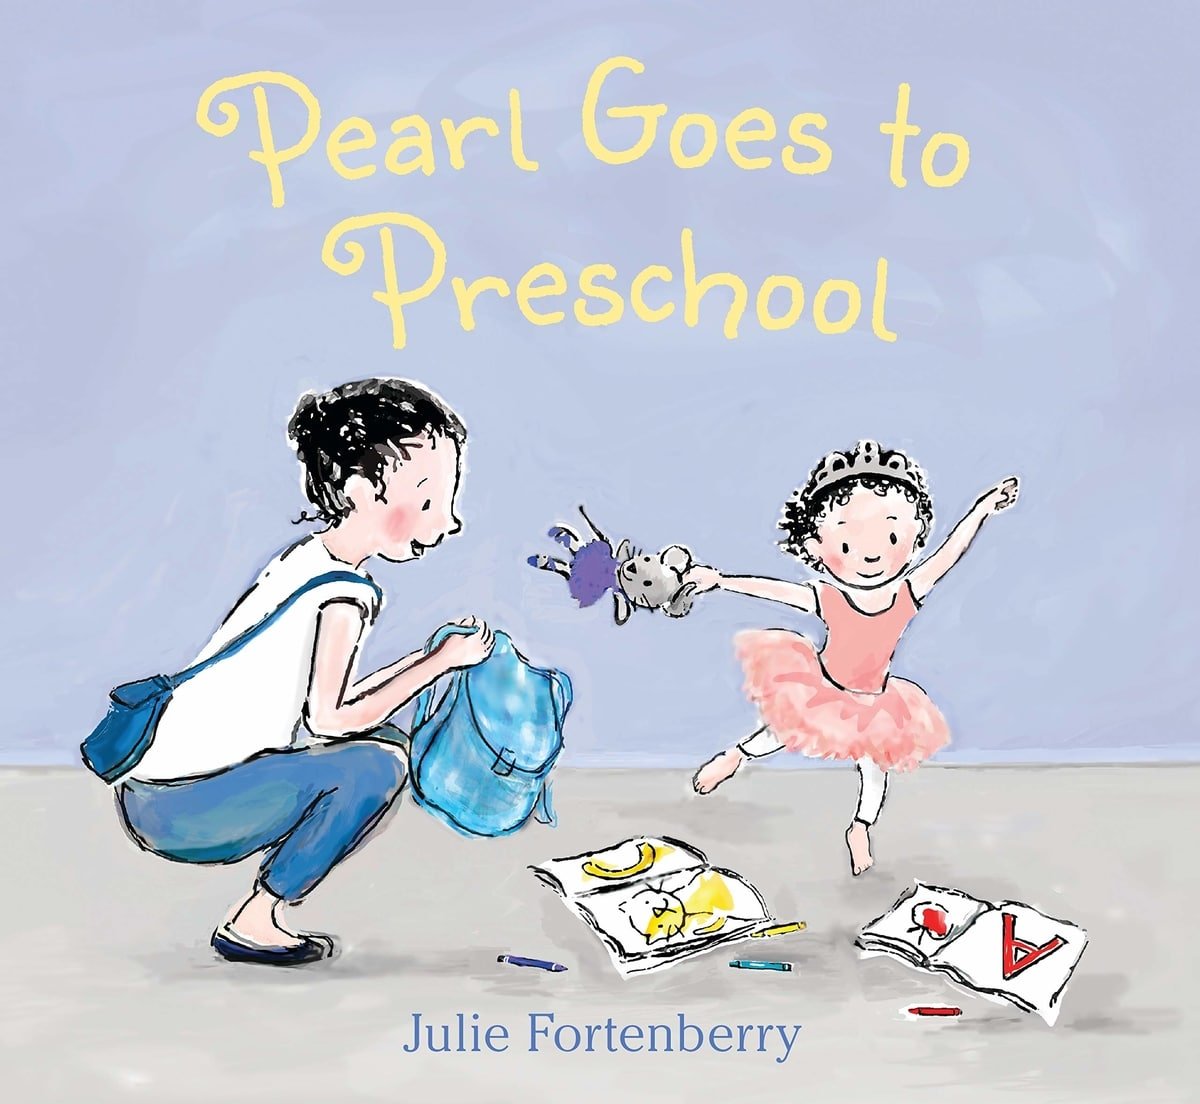 The book cover of "Pearl Goes to Preschool."